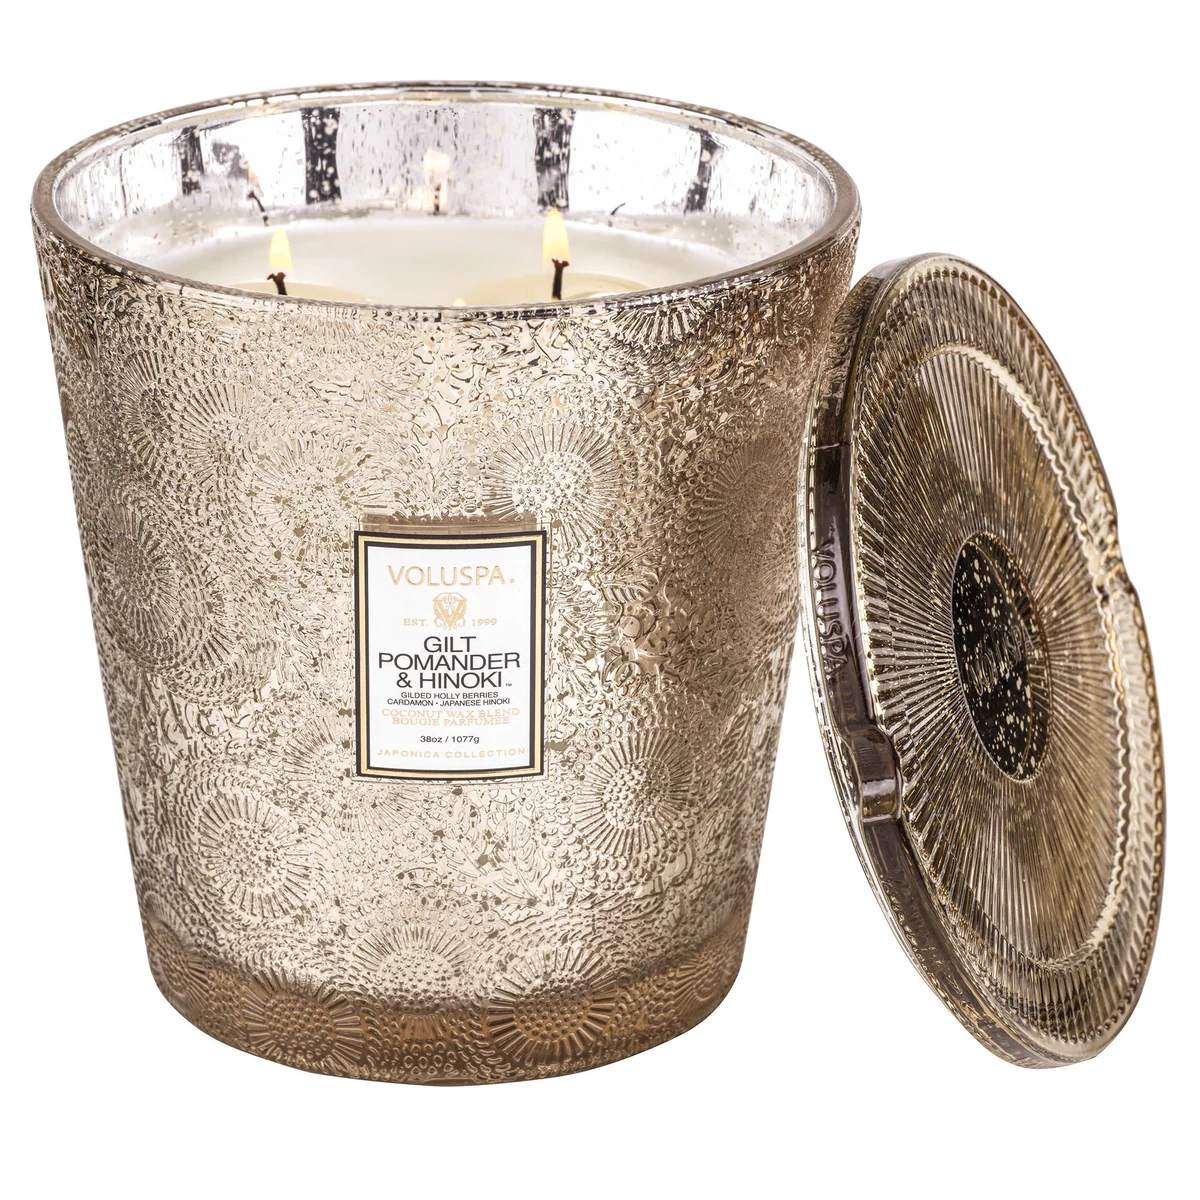 Gilt Pomander Hinoki 3 Wick Hearth Candle Voluspa-Candle-Lemons and Limes Boutique